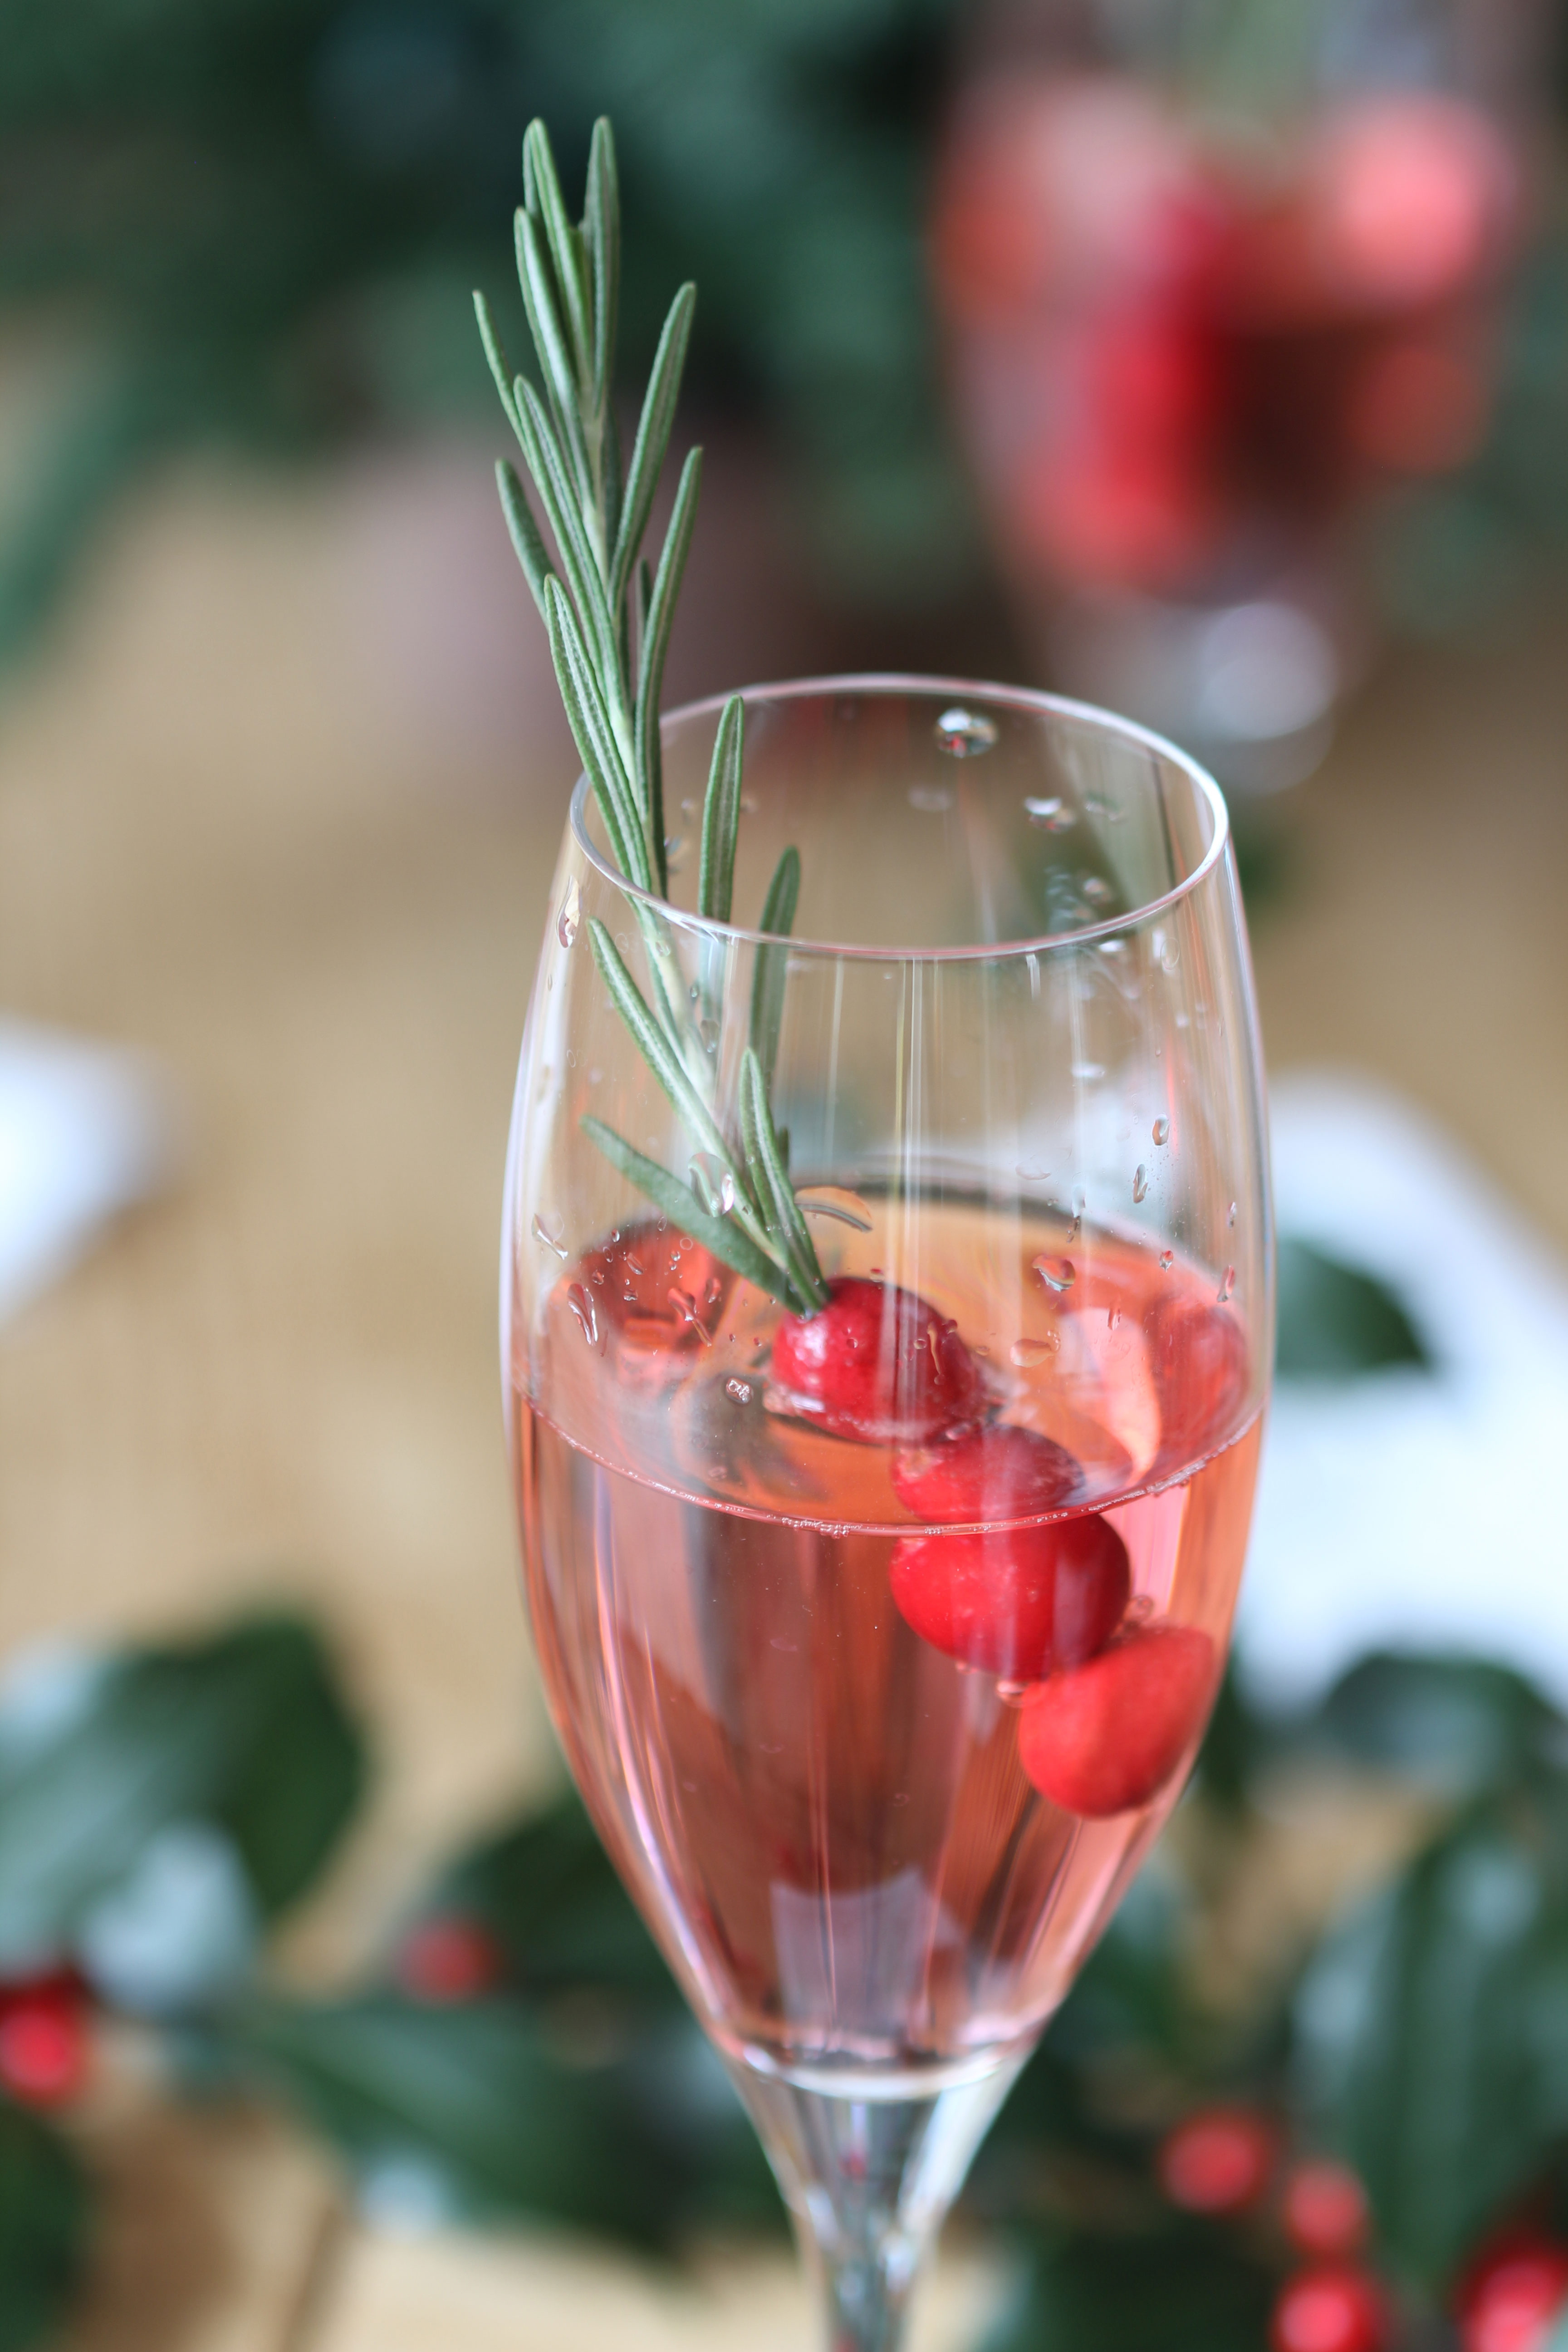 Celebrate the season with this festive and delicious Cranberry Rosemary Champagne Cocktail that will WOW your guests!